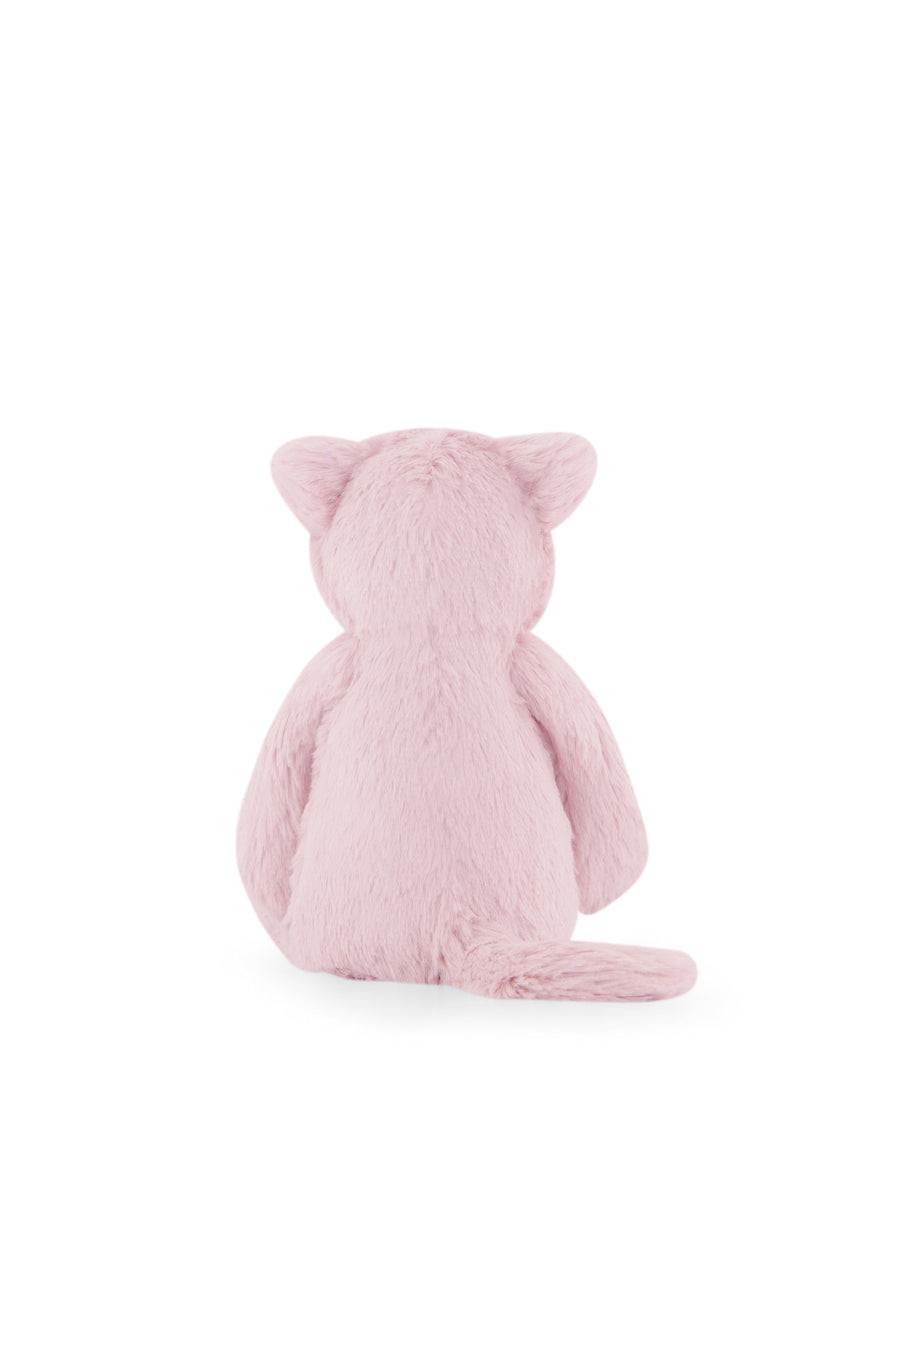 Snuggle Bunnies - Elsie the Kitty - Powder Pink Childrens Toy from Jamie Kay USA